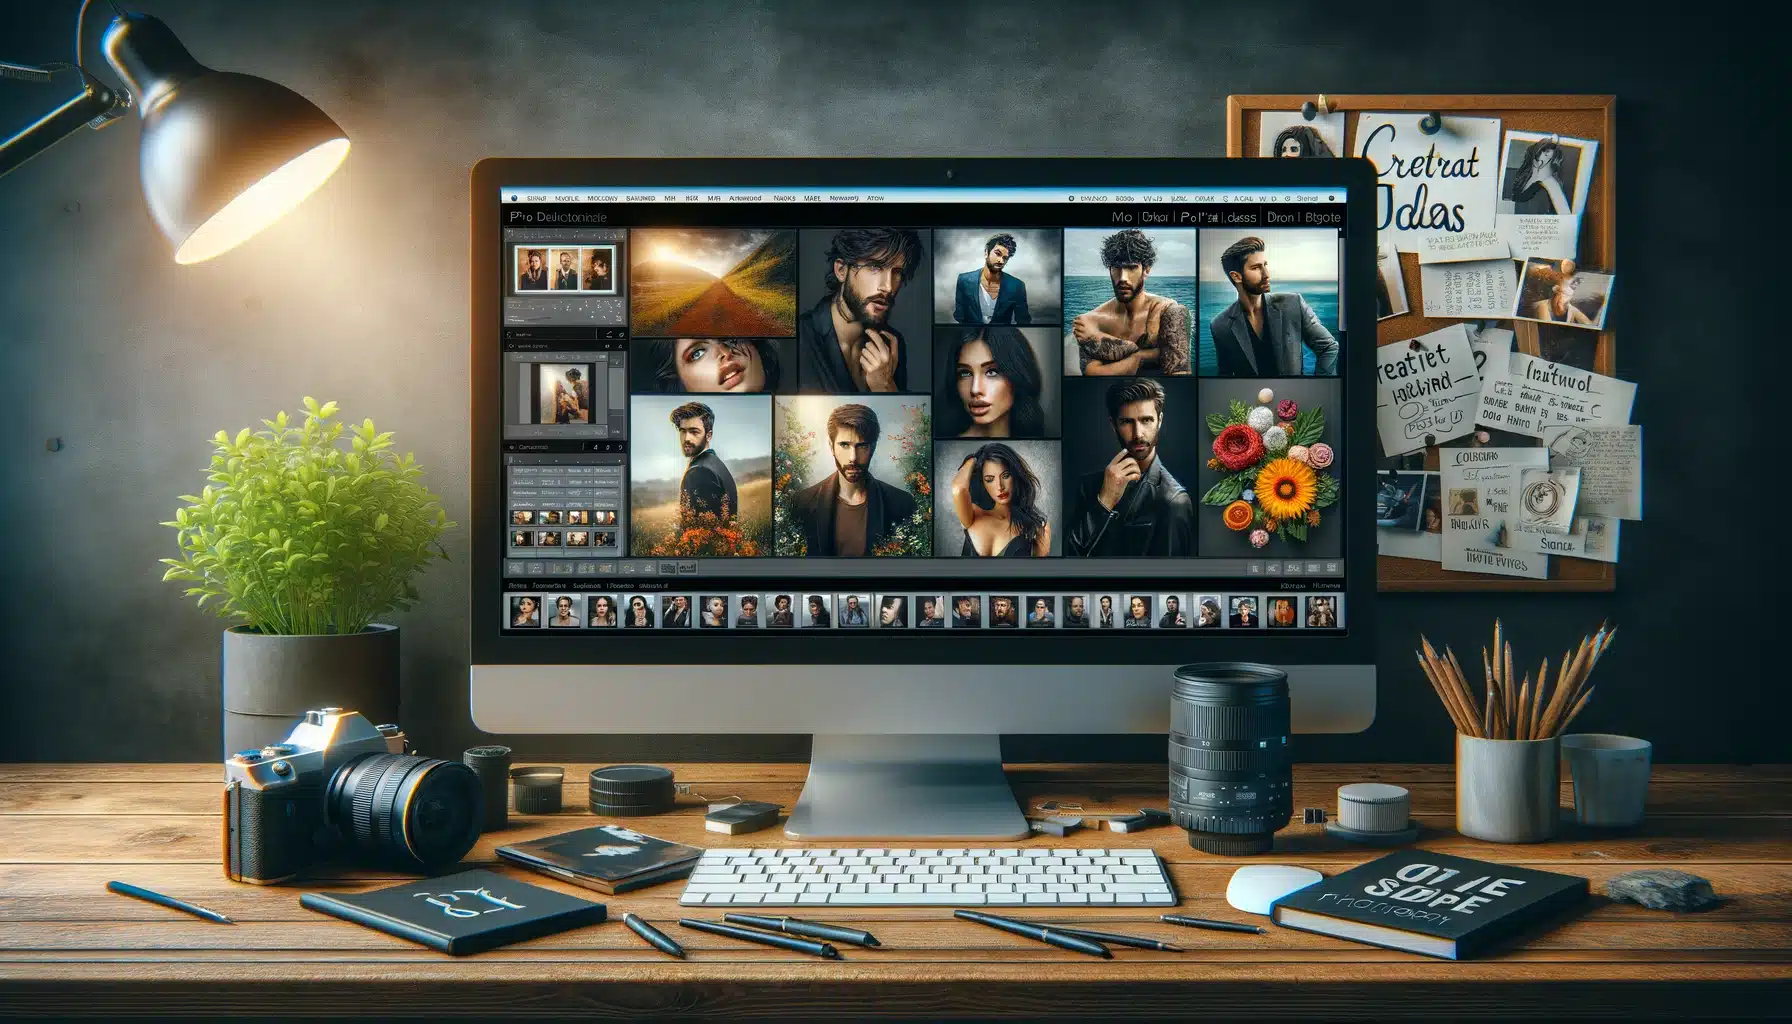 Desktop screen displaying creative portrait ideas and photography tips within a photo editing software interface.